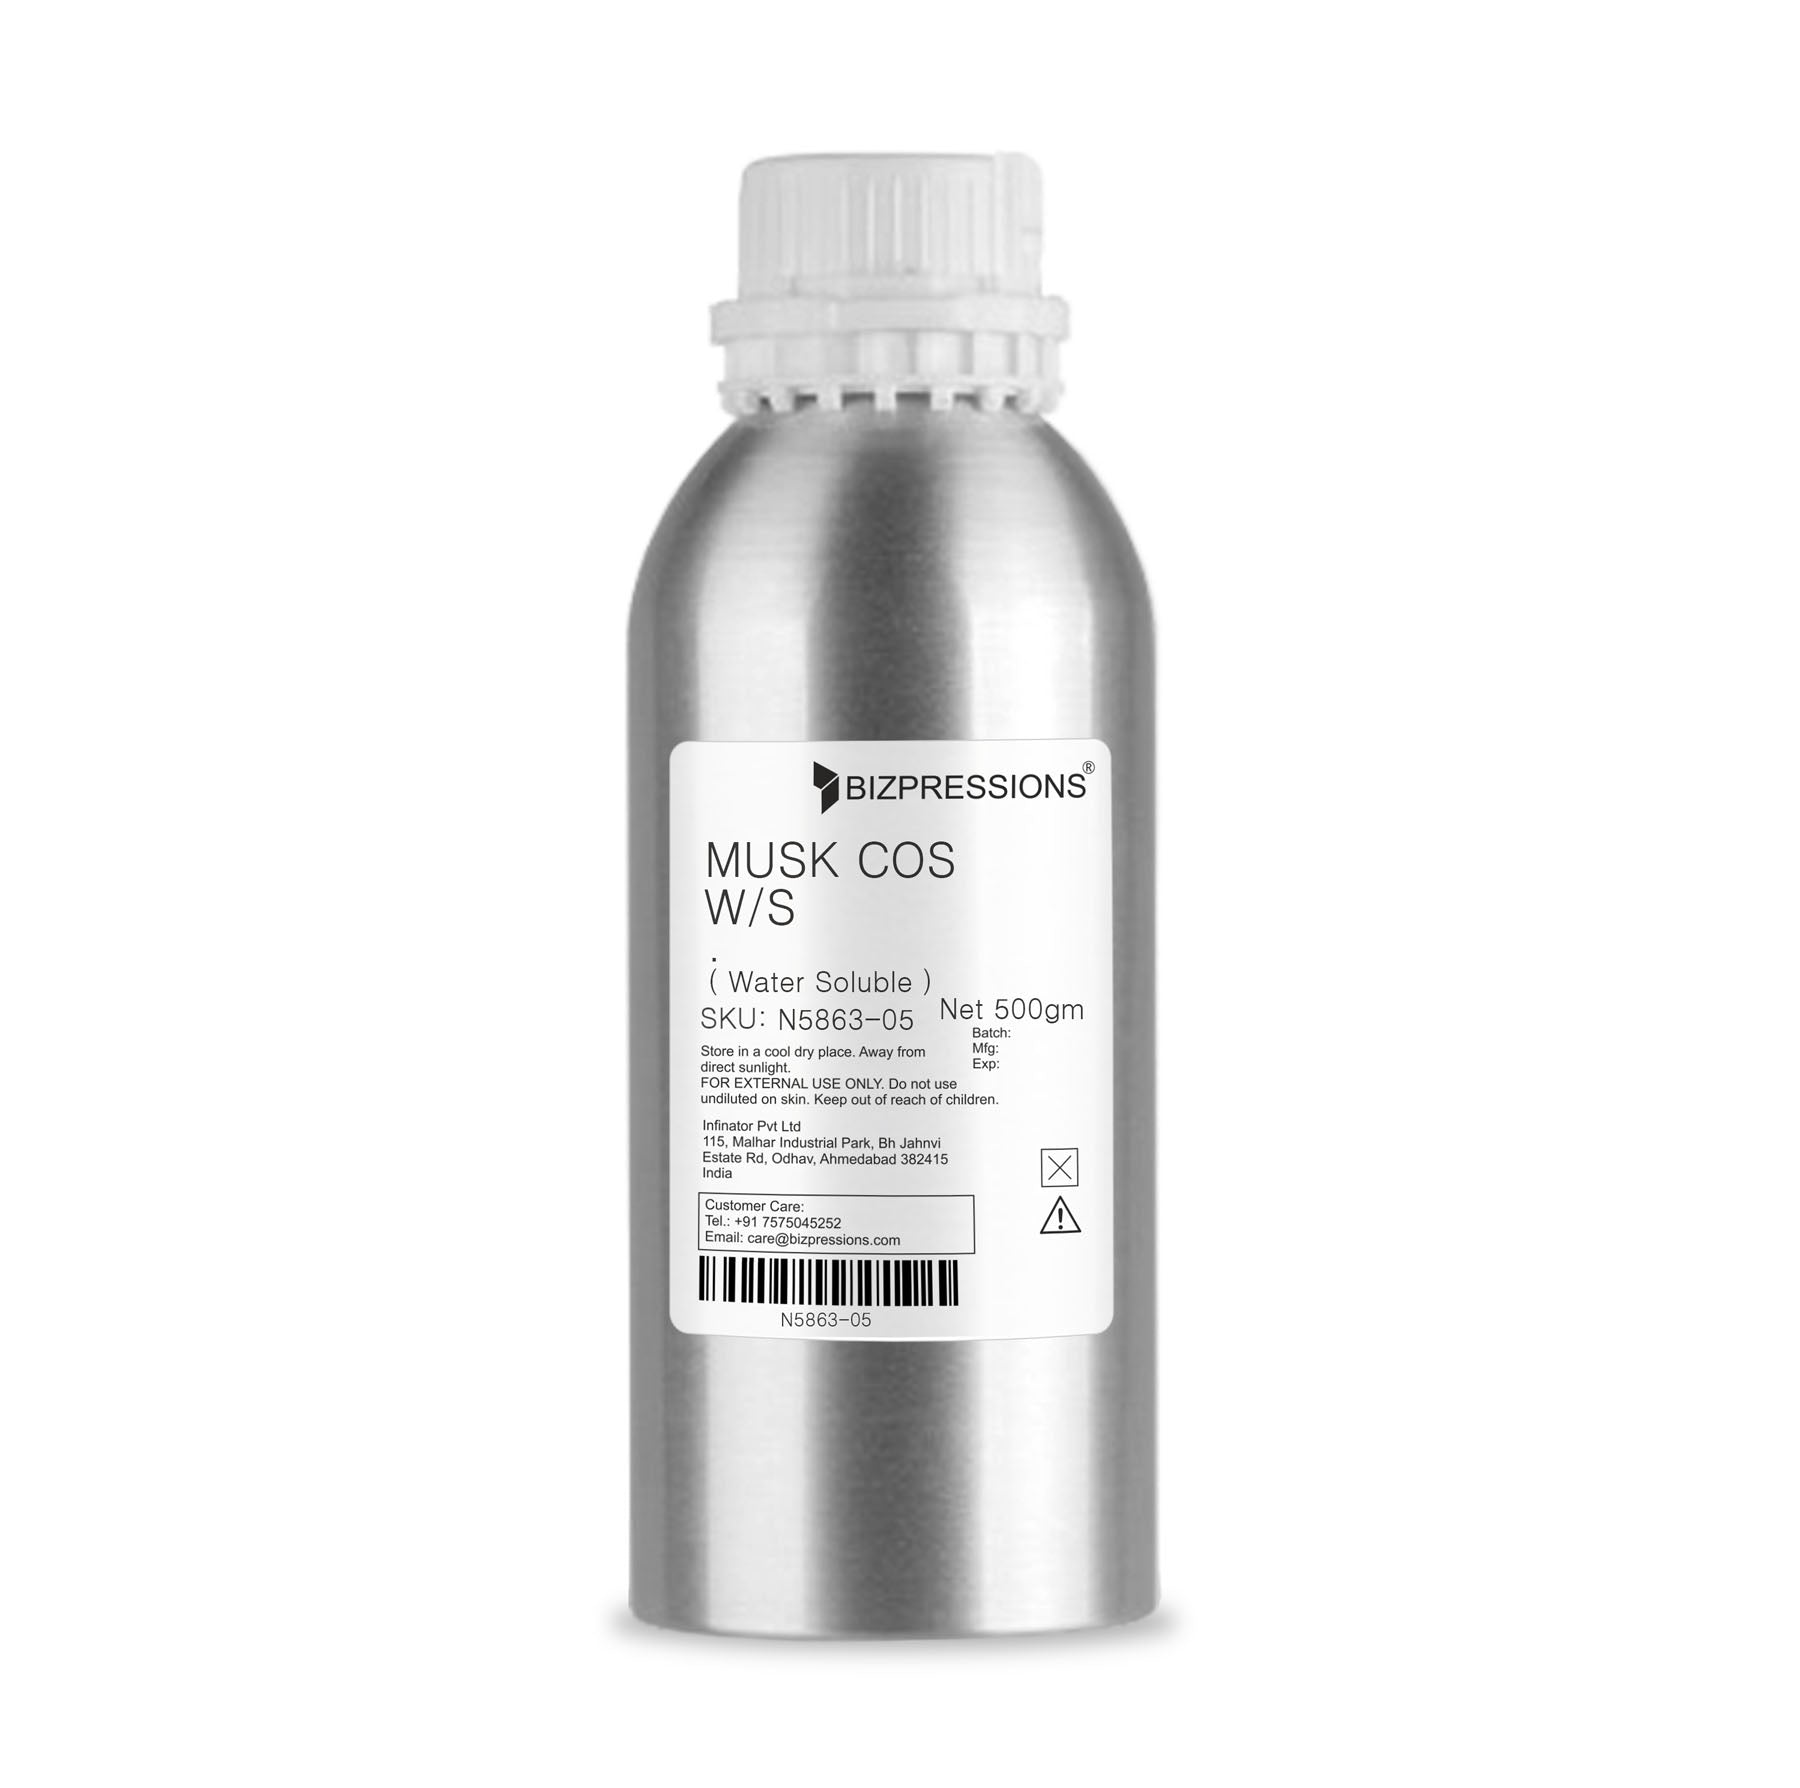 MUSK COS W/S - Fragrance ( Water Soluble ) - 500 gm